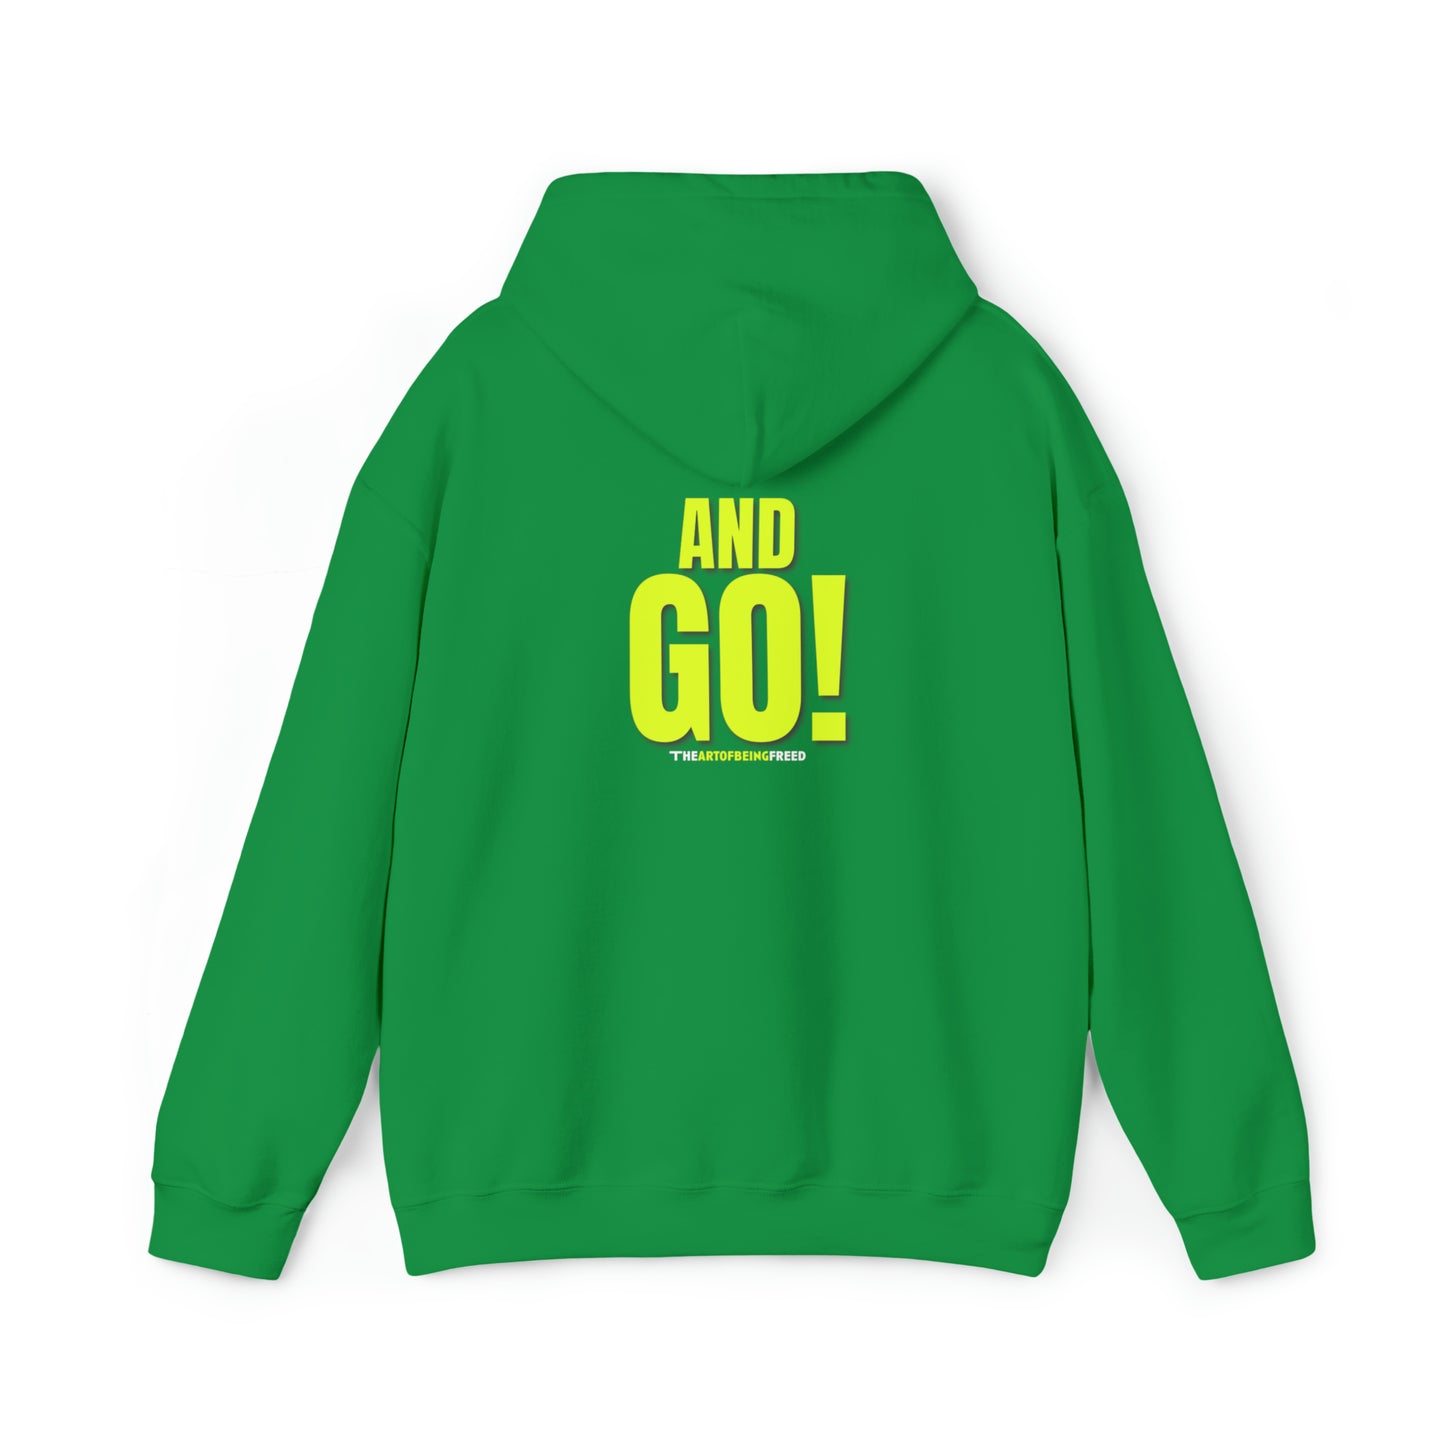 Premium 'Push Start AND GO' Hoodie in Three Bold Colors